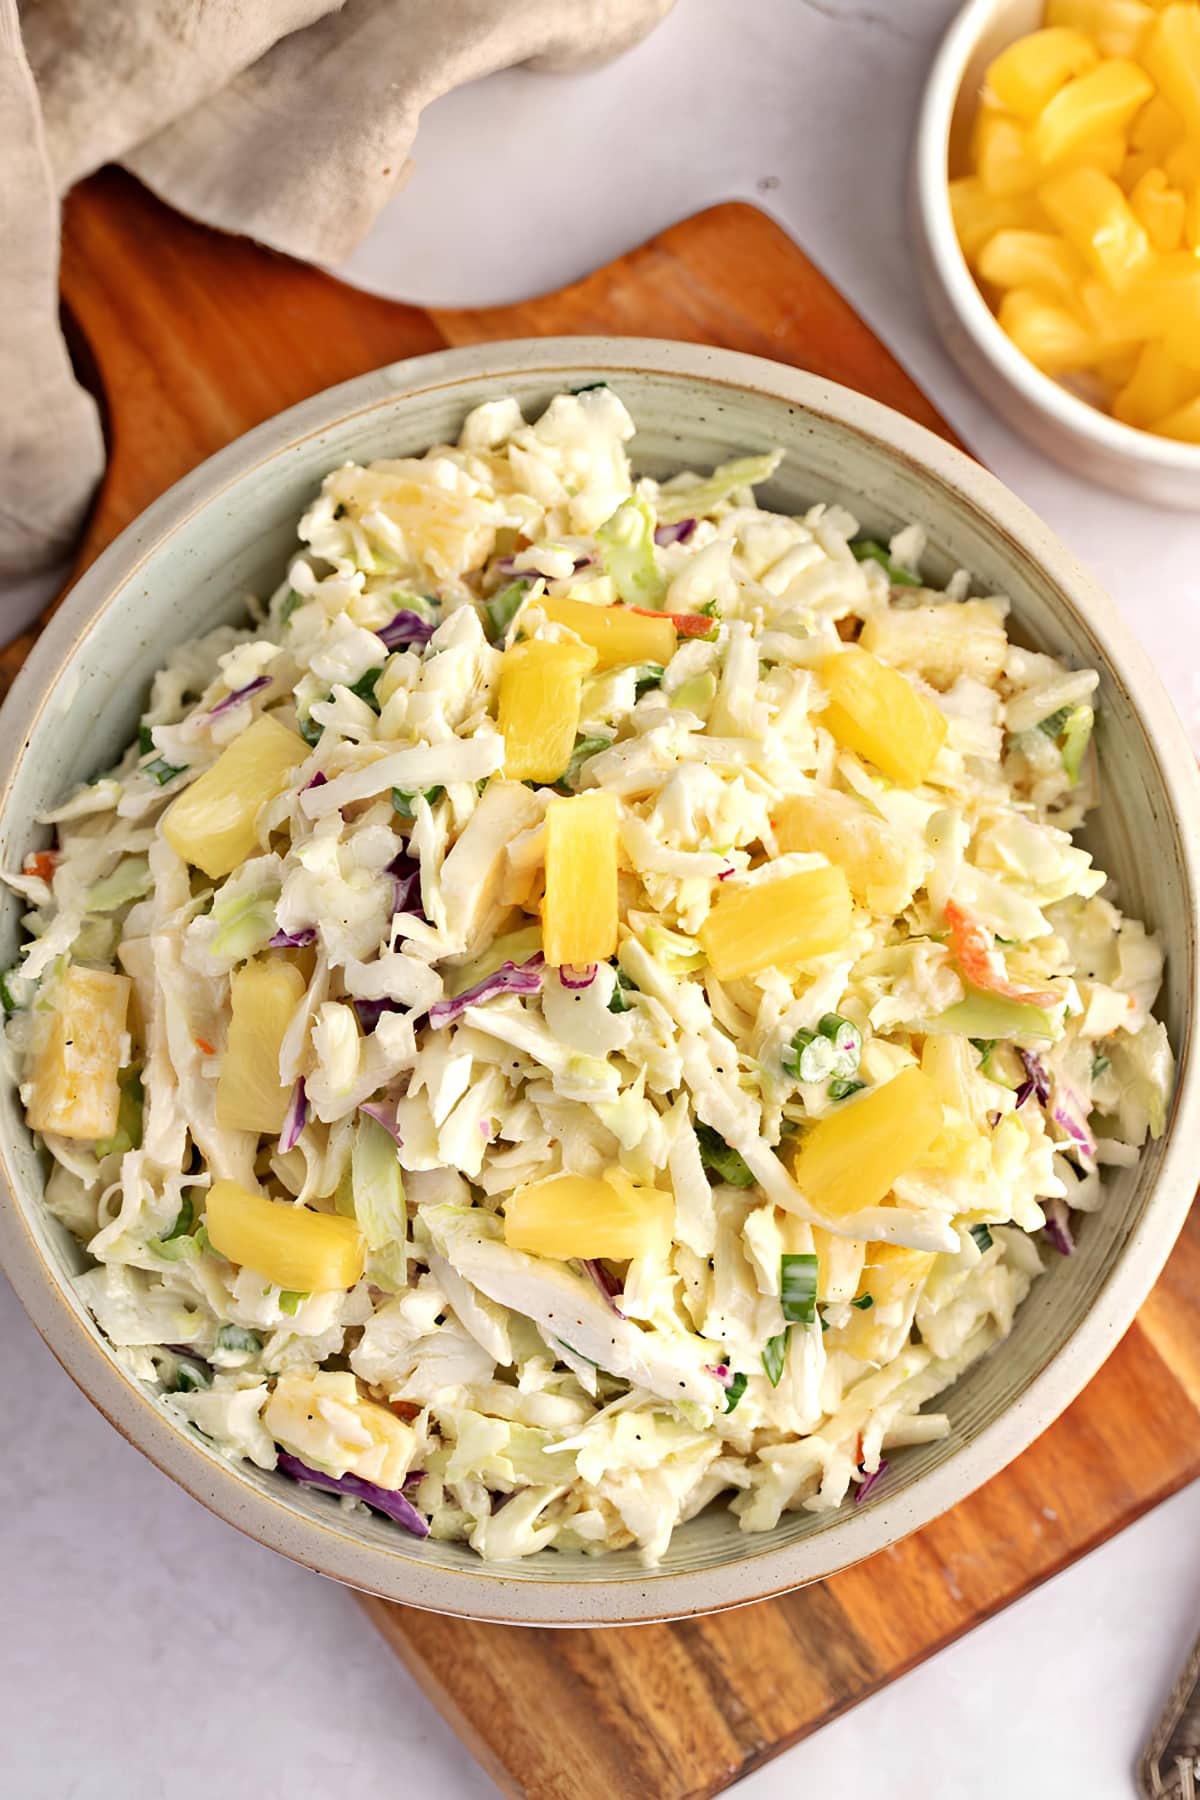 Homemade Pineapple Coleslaw in a Bowl